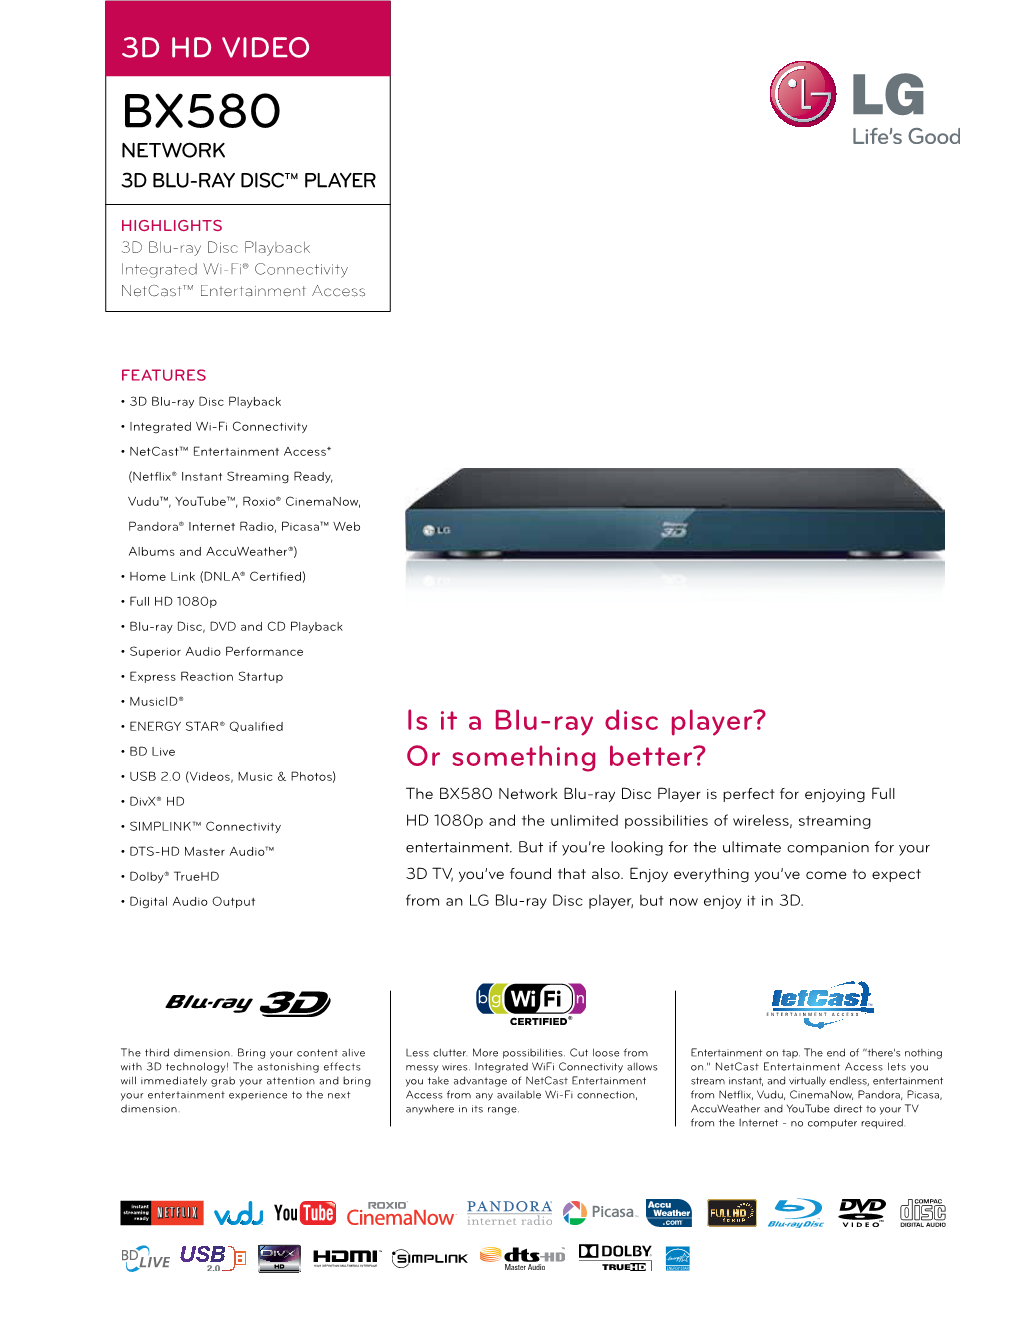 Is It a Blu-Ray Disc Player? Or Something Better? 3D HD VIDEO